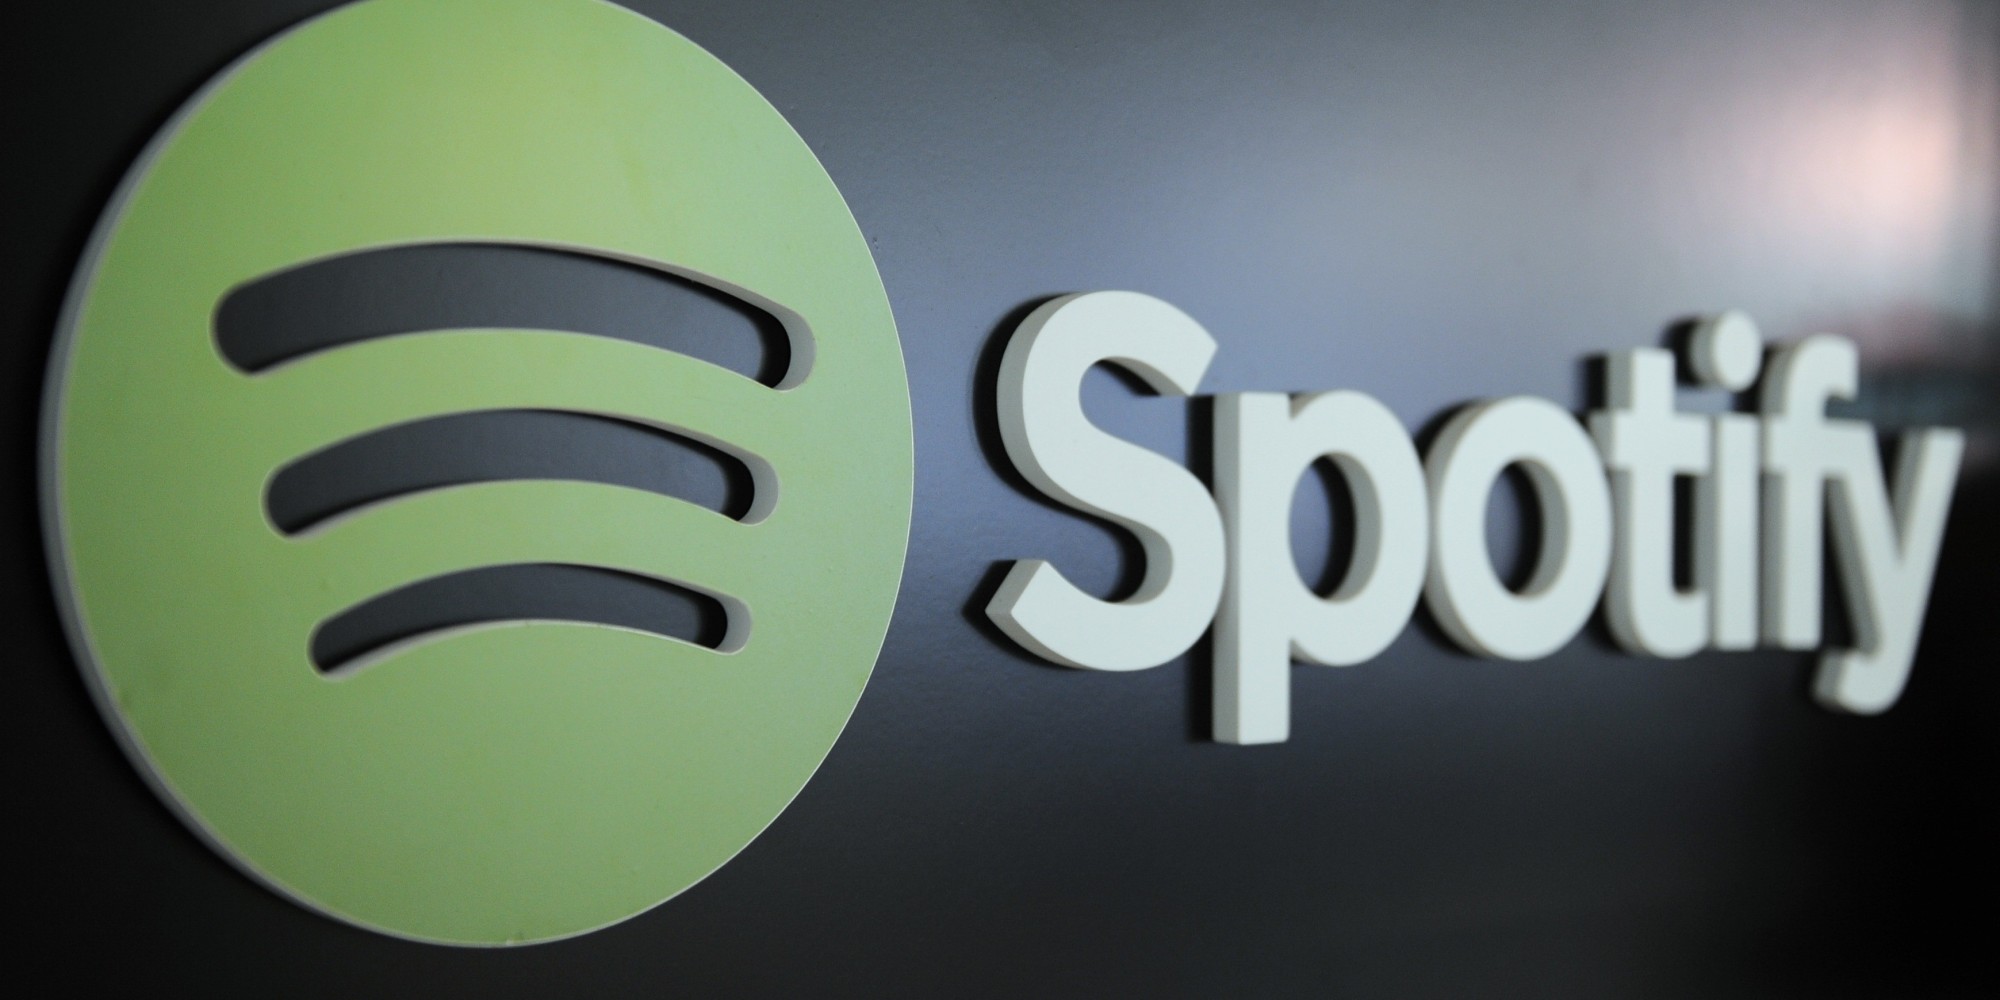 The logo of the music streaming service Spotify in Berlin, Germany, 25 February 2014. Photo: Britta Pedersen